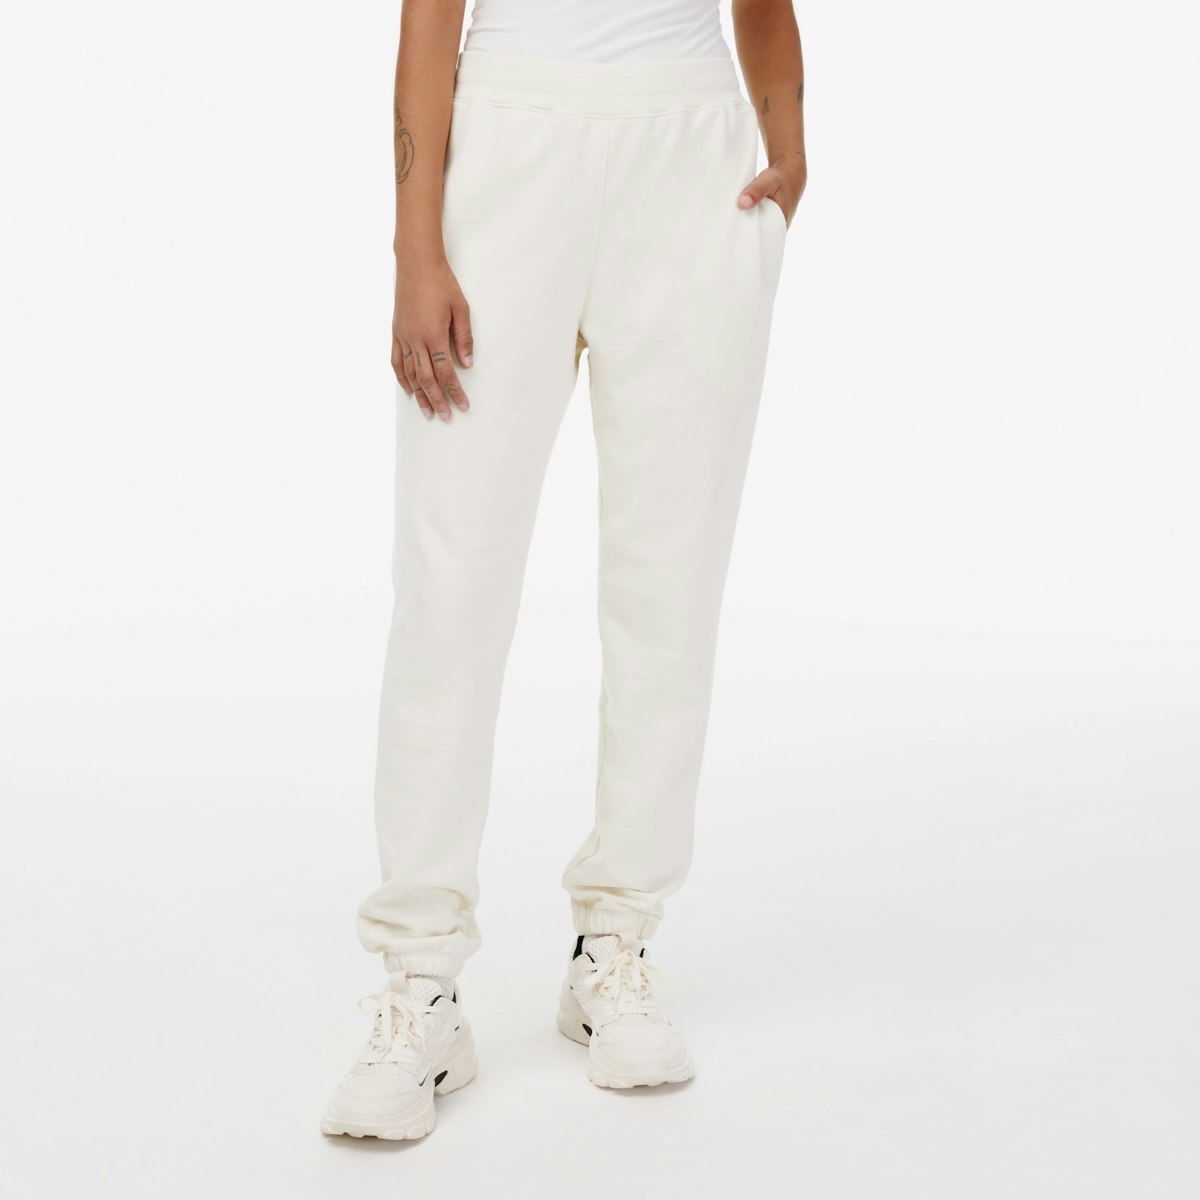 UnisexRecycledTerrySweatpants_OffWhite_Womens_OnFigure_1x1_0561.jpg